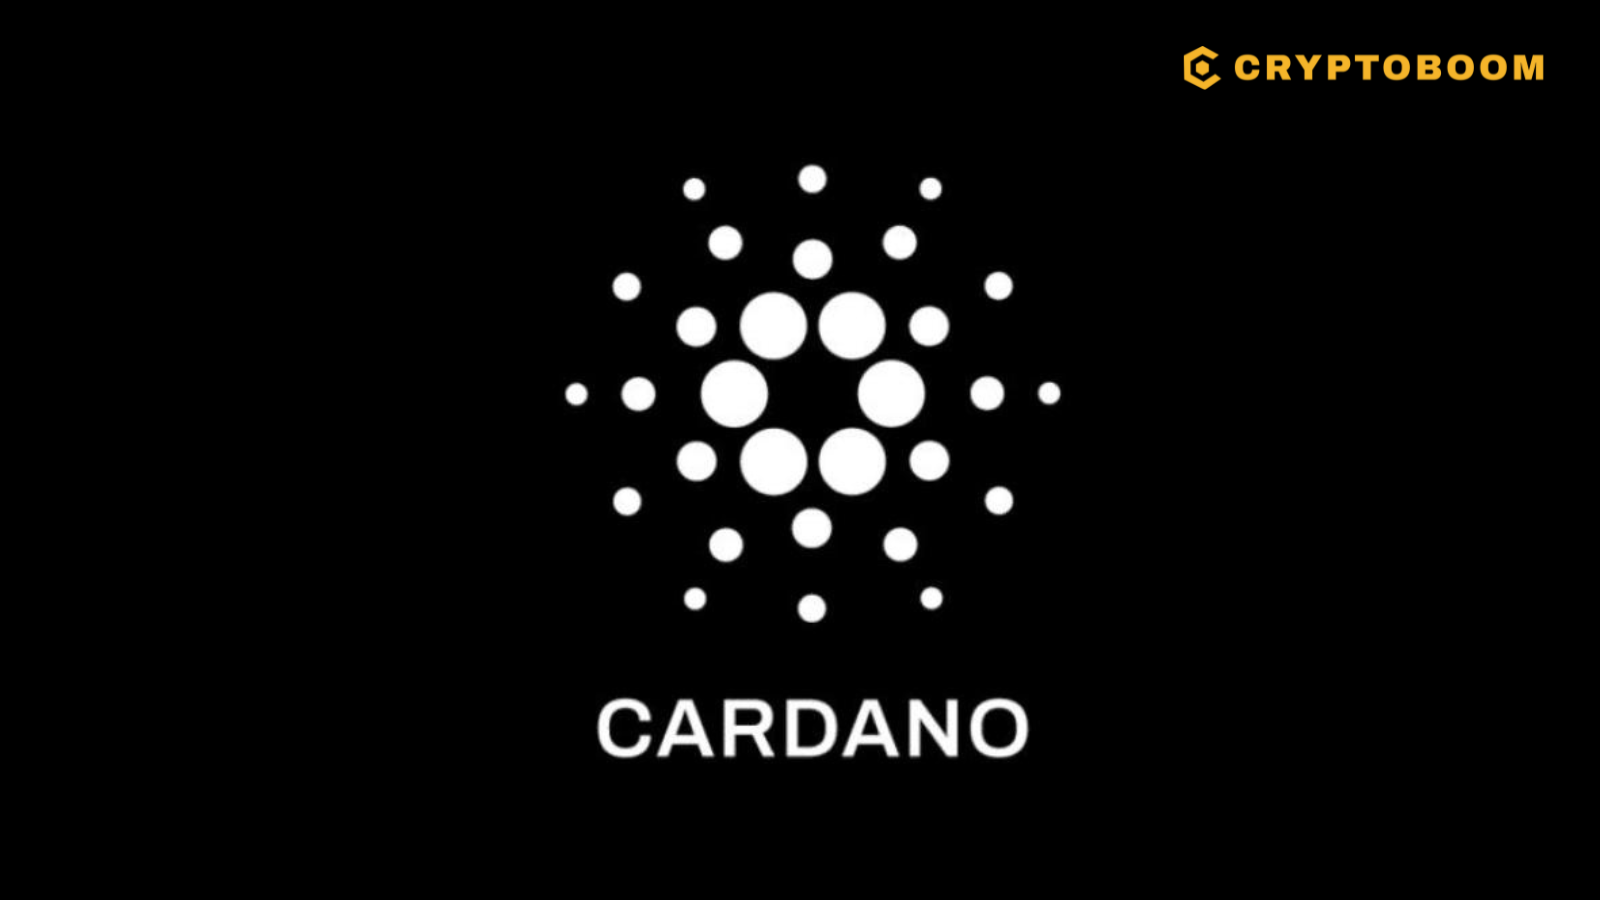 Cardano's Robust Defense Mechanisms Stop DDoS Attack